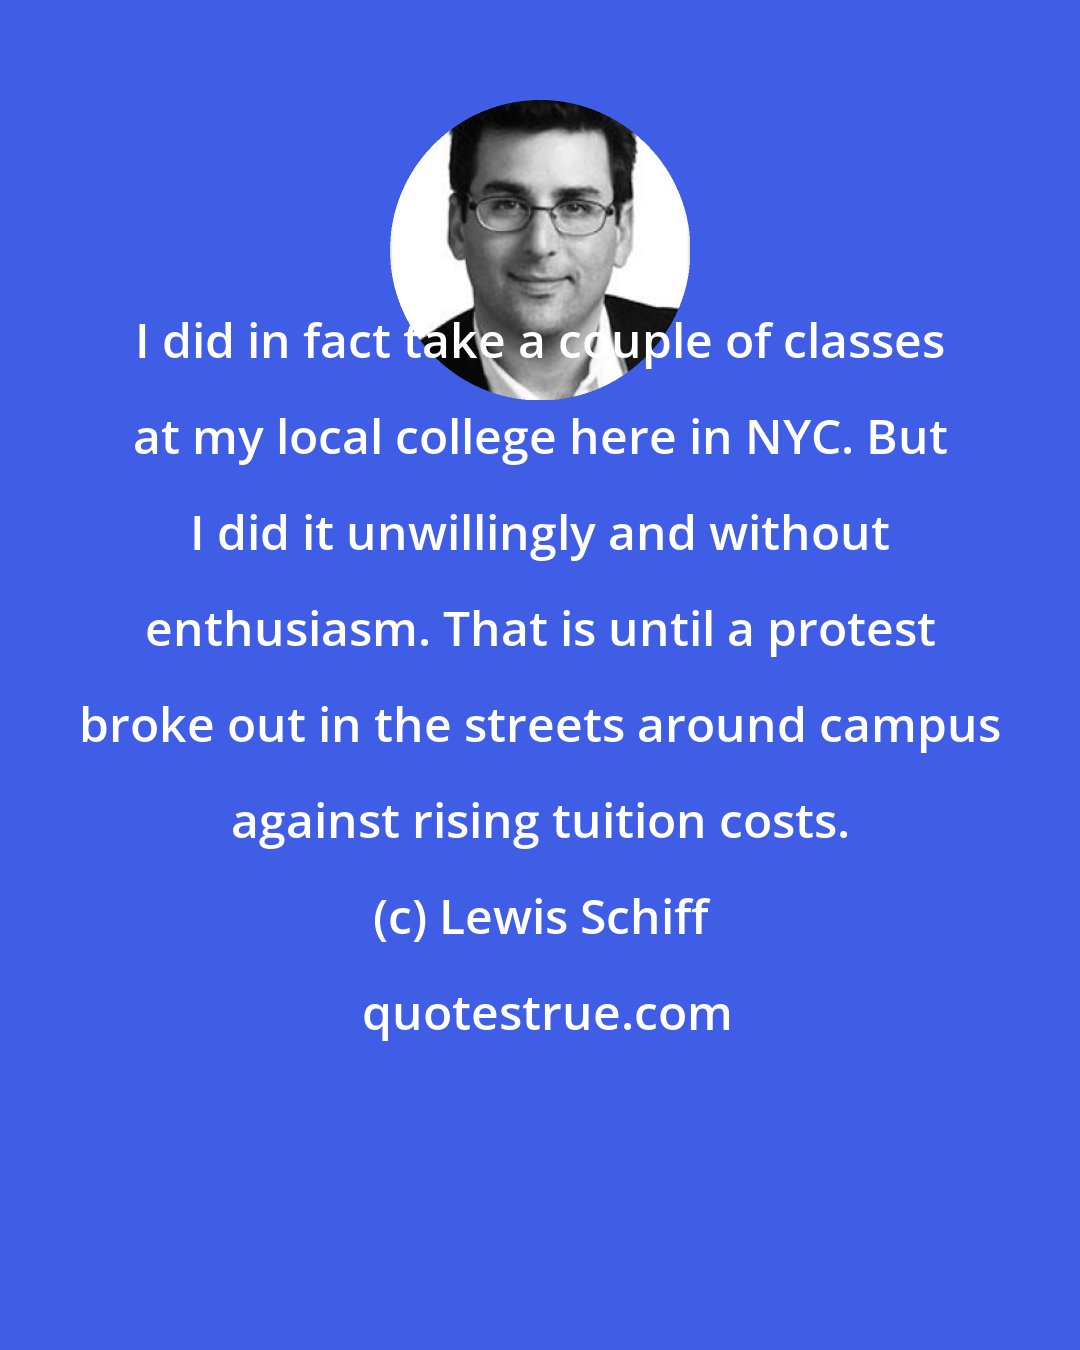 Lewis Schiff: I did in fact take a couple of classes at my local college here in NYC. But I did it unwillingly and without enthusiasm. That is until a protest broke out in the streets around campus against rising tuition costs.